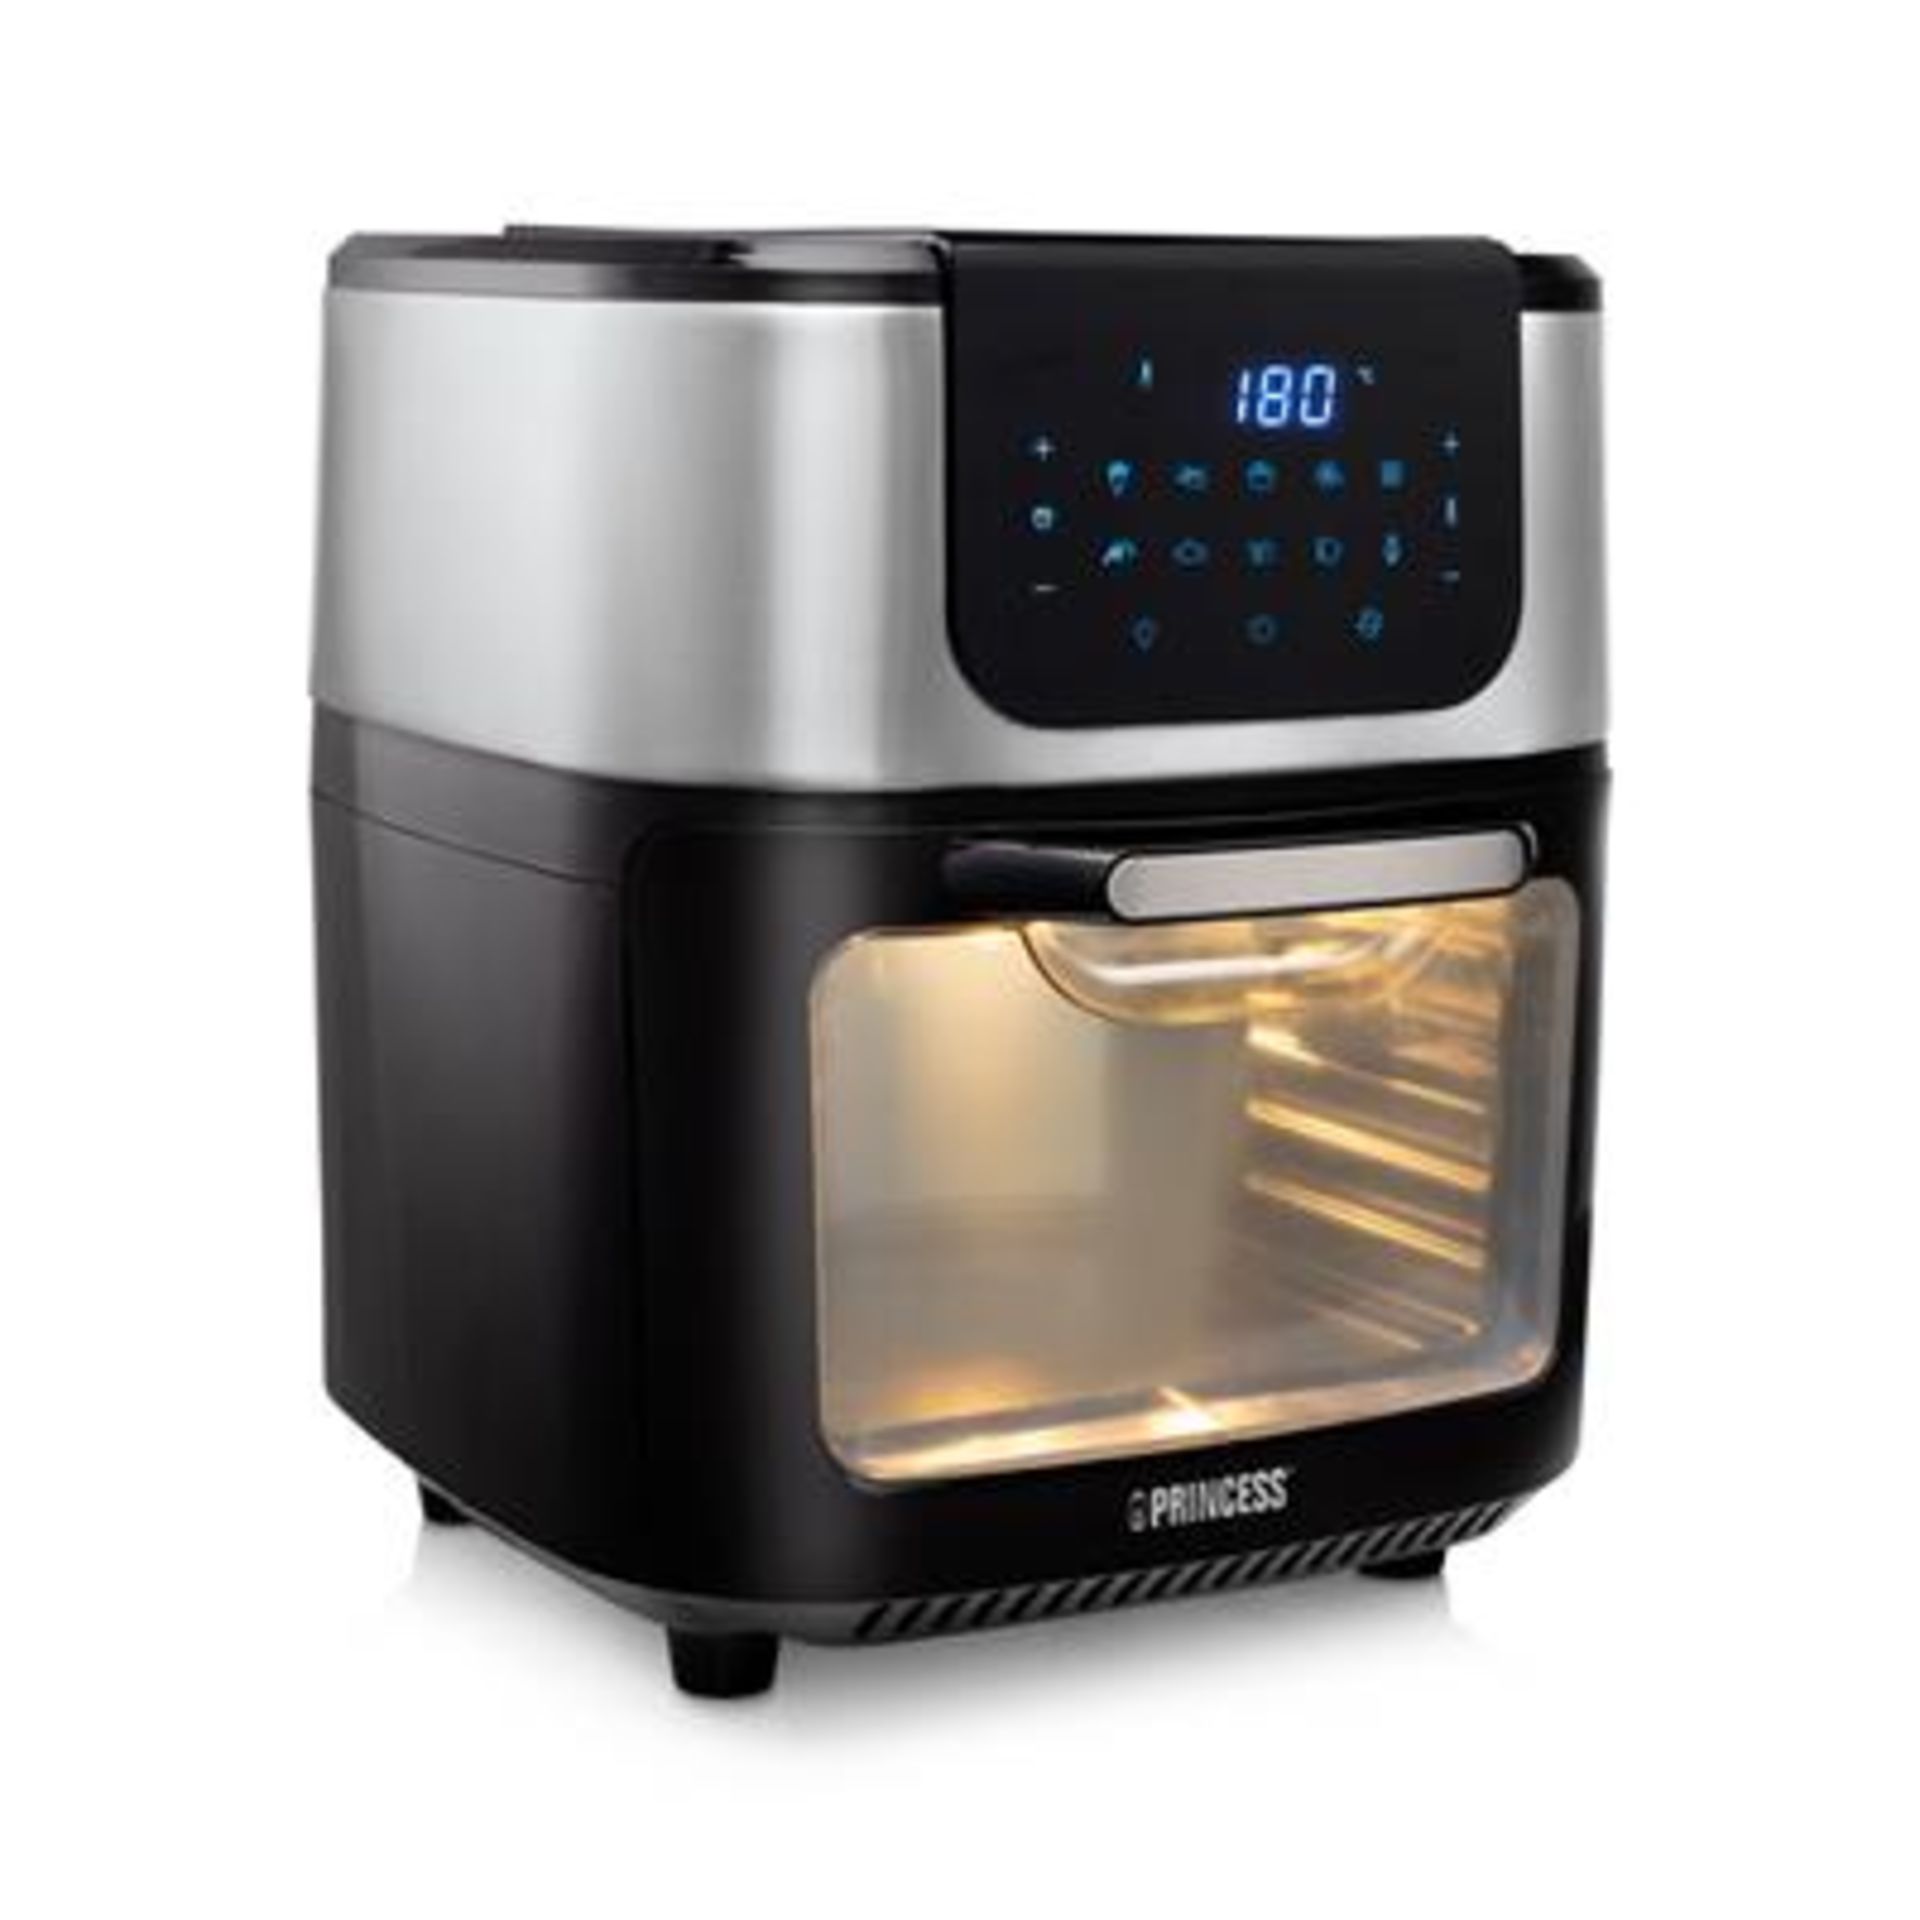 Princess Air Fryer Oven - P1. Make chicken, fries, vegetables, pie, bread and much more with this